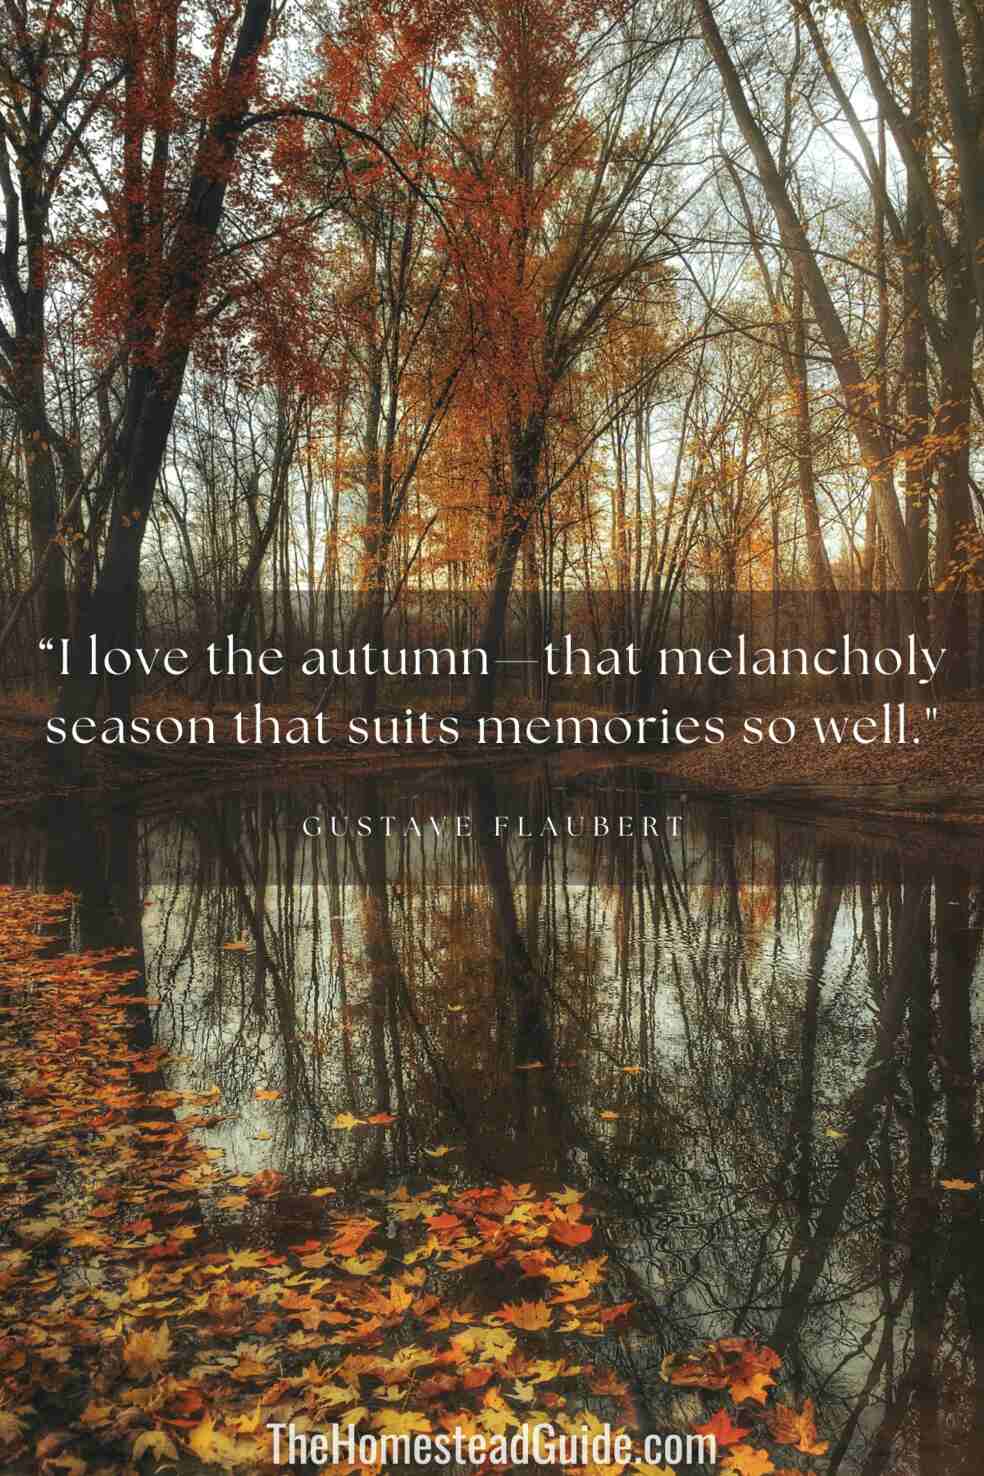 I love the autumn—that melancholy season that suits memories so well.